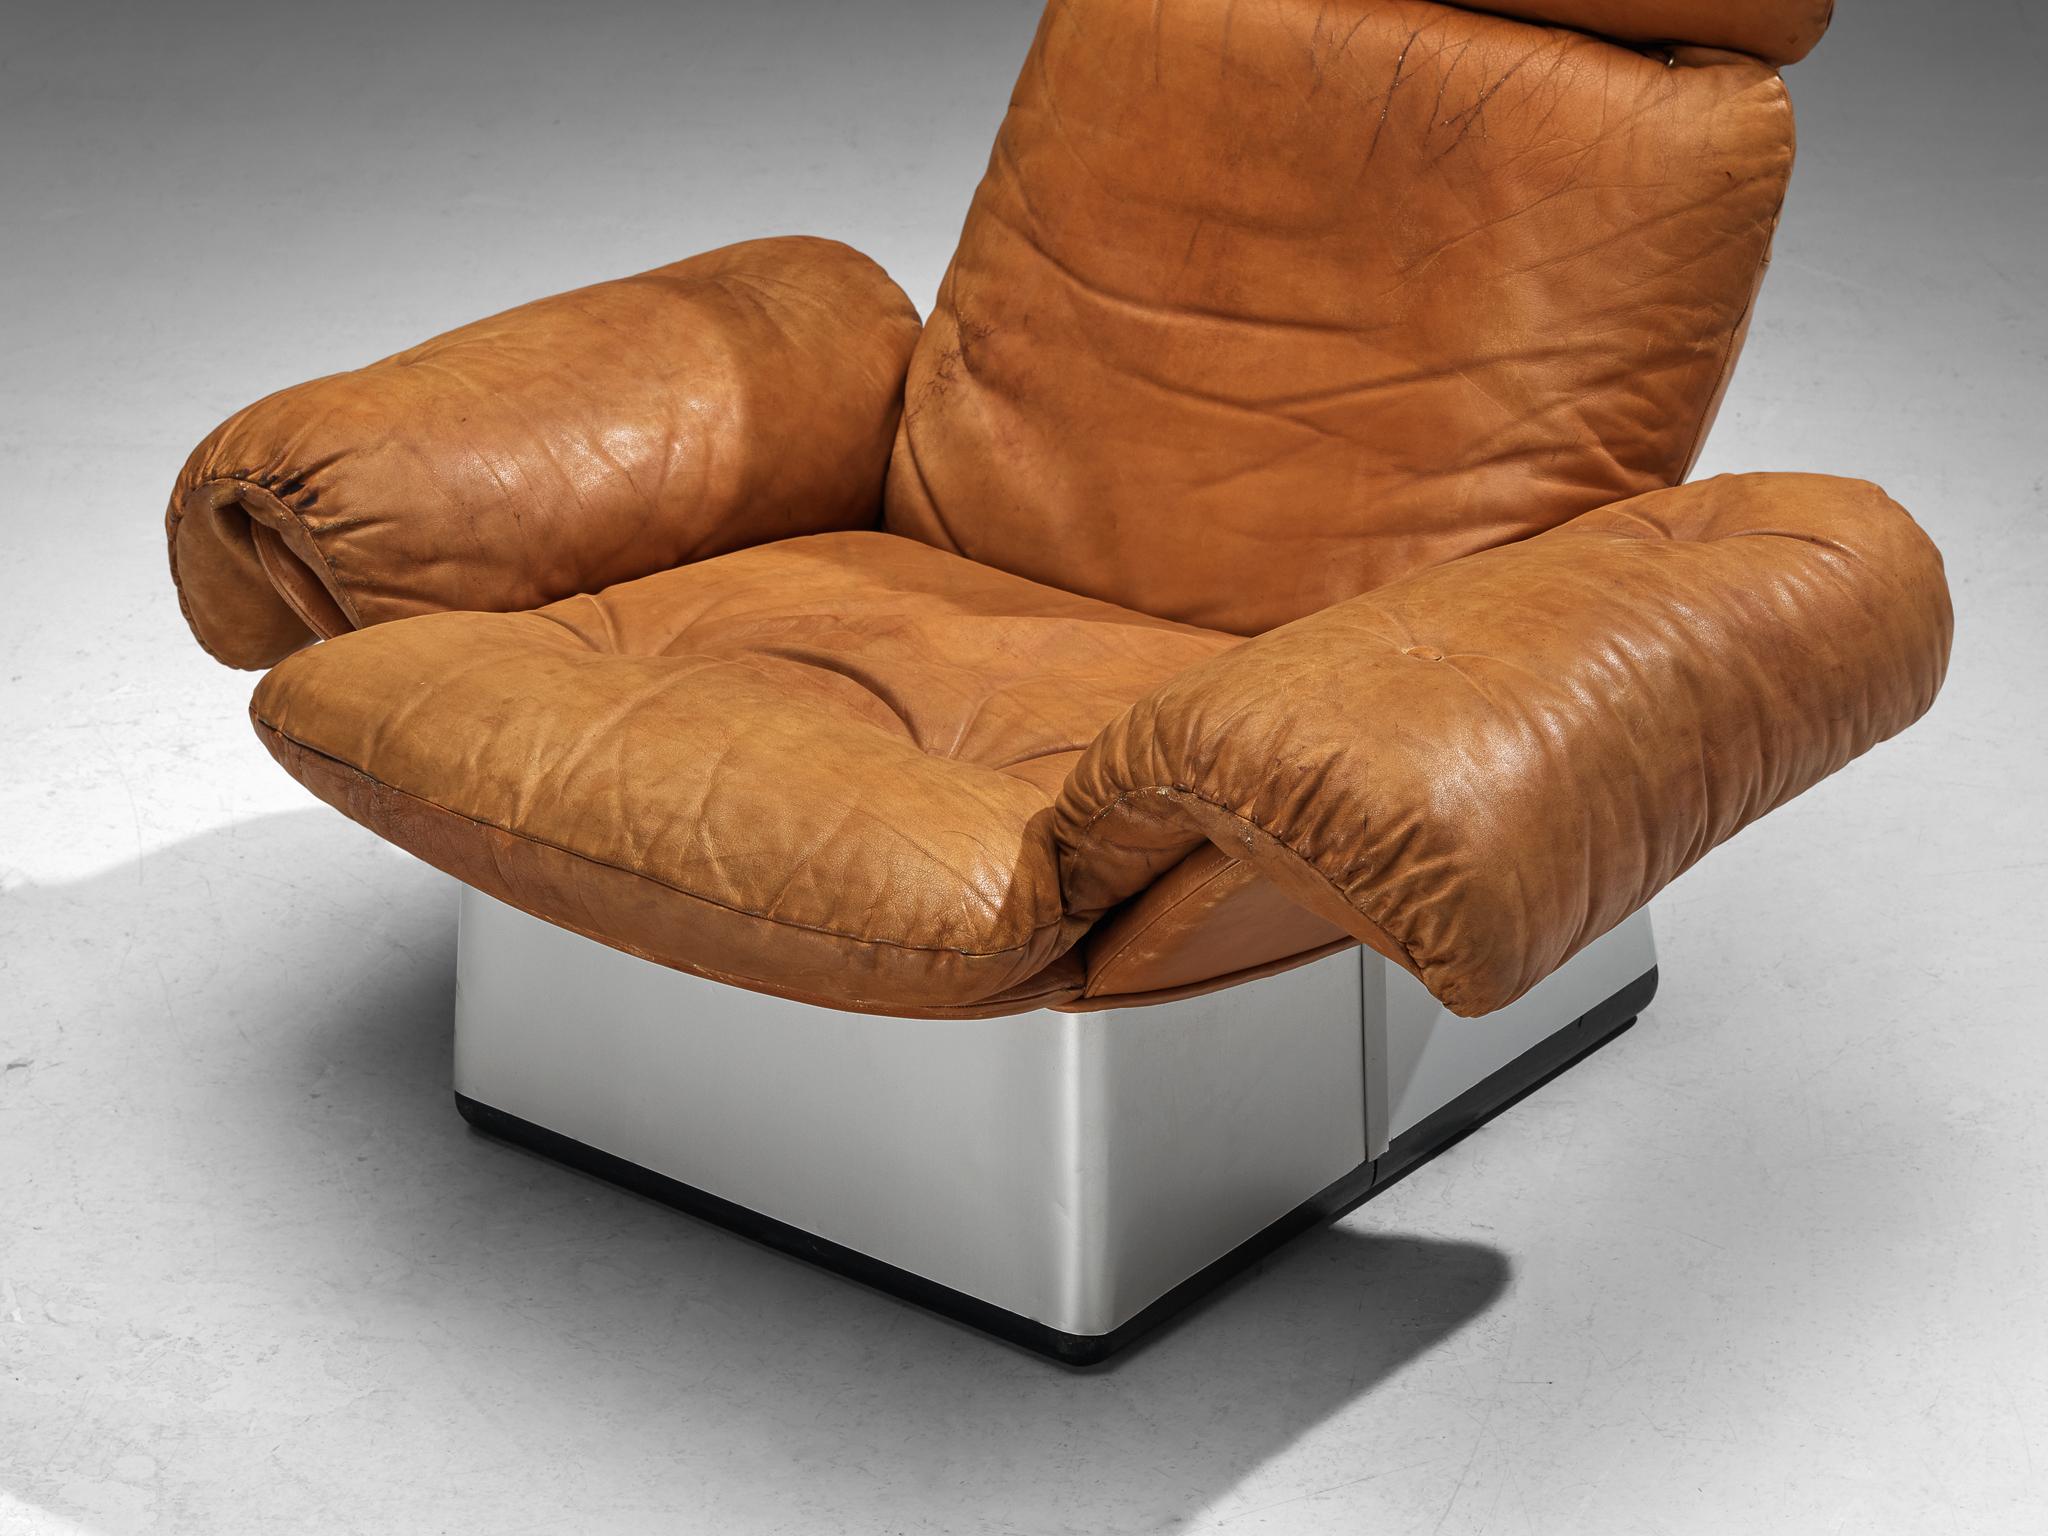 Late 20th Century Italian Lounge Chair in Cognac Leather For Sale